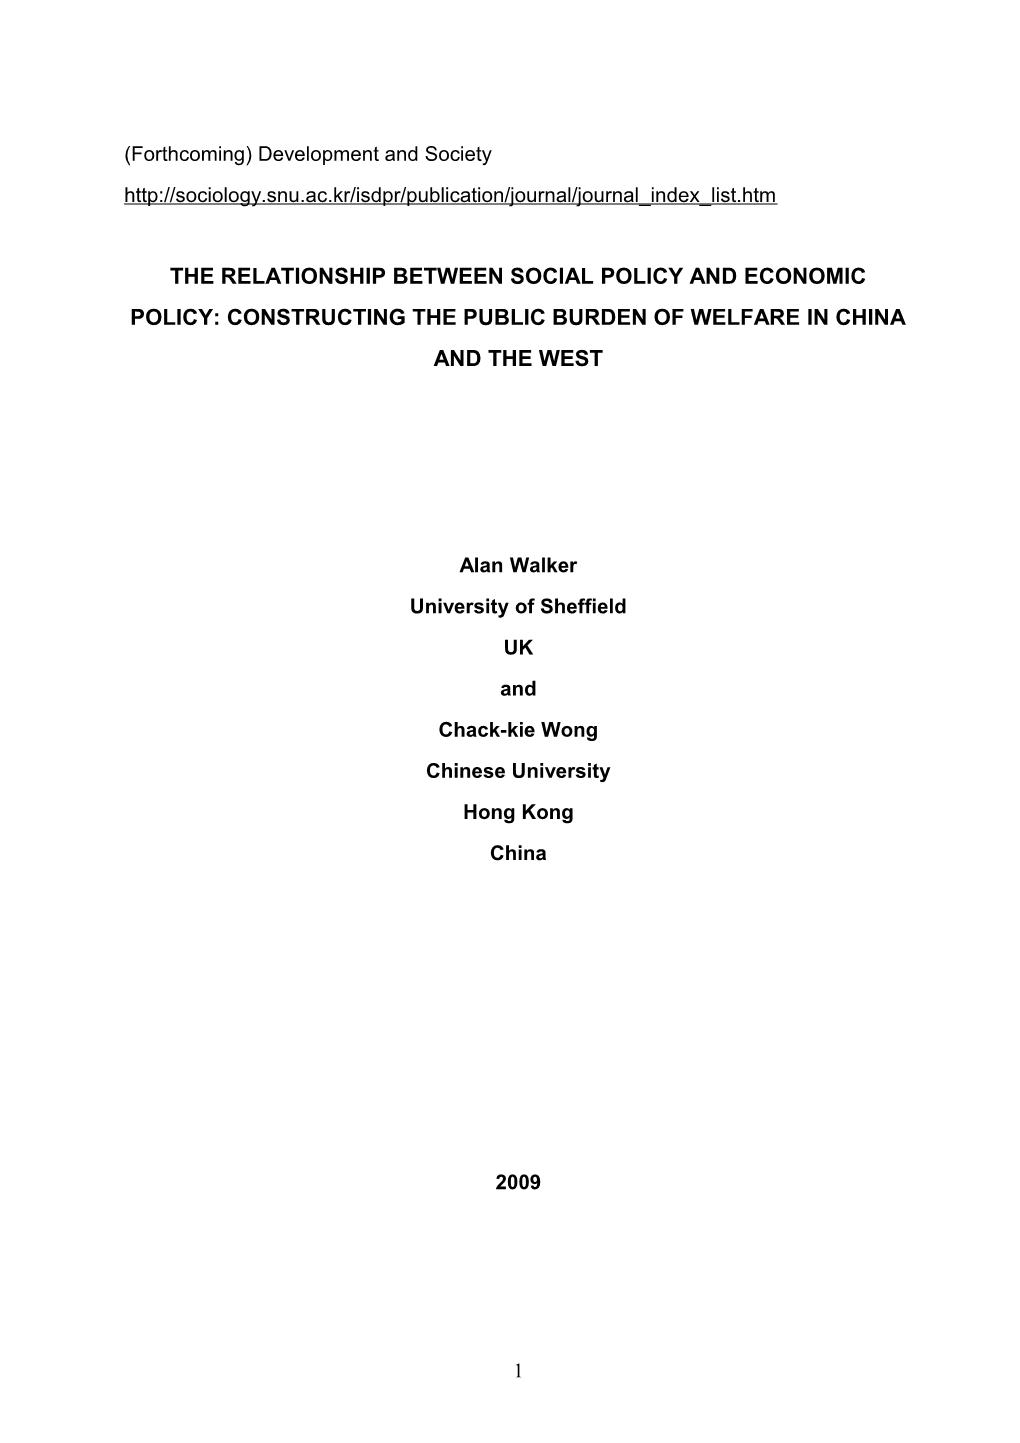 The Relationship Between Social Policy and Economic Policy: Constructing the Public Burden